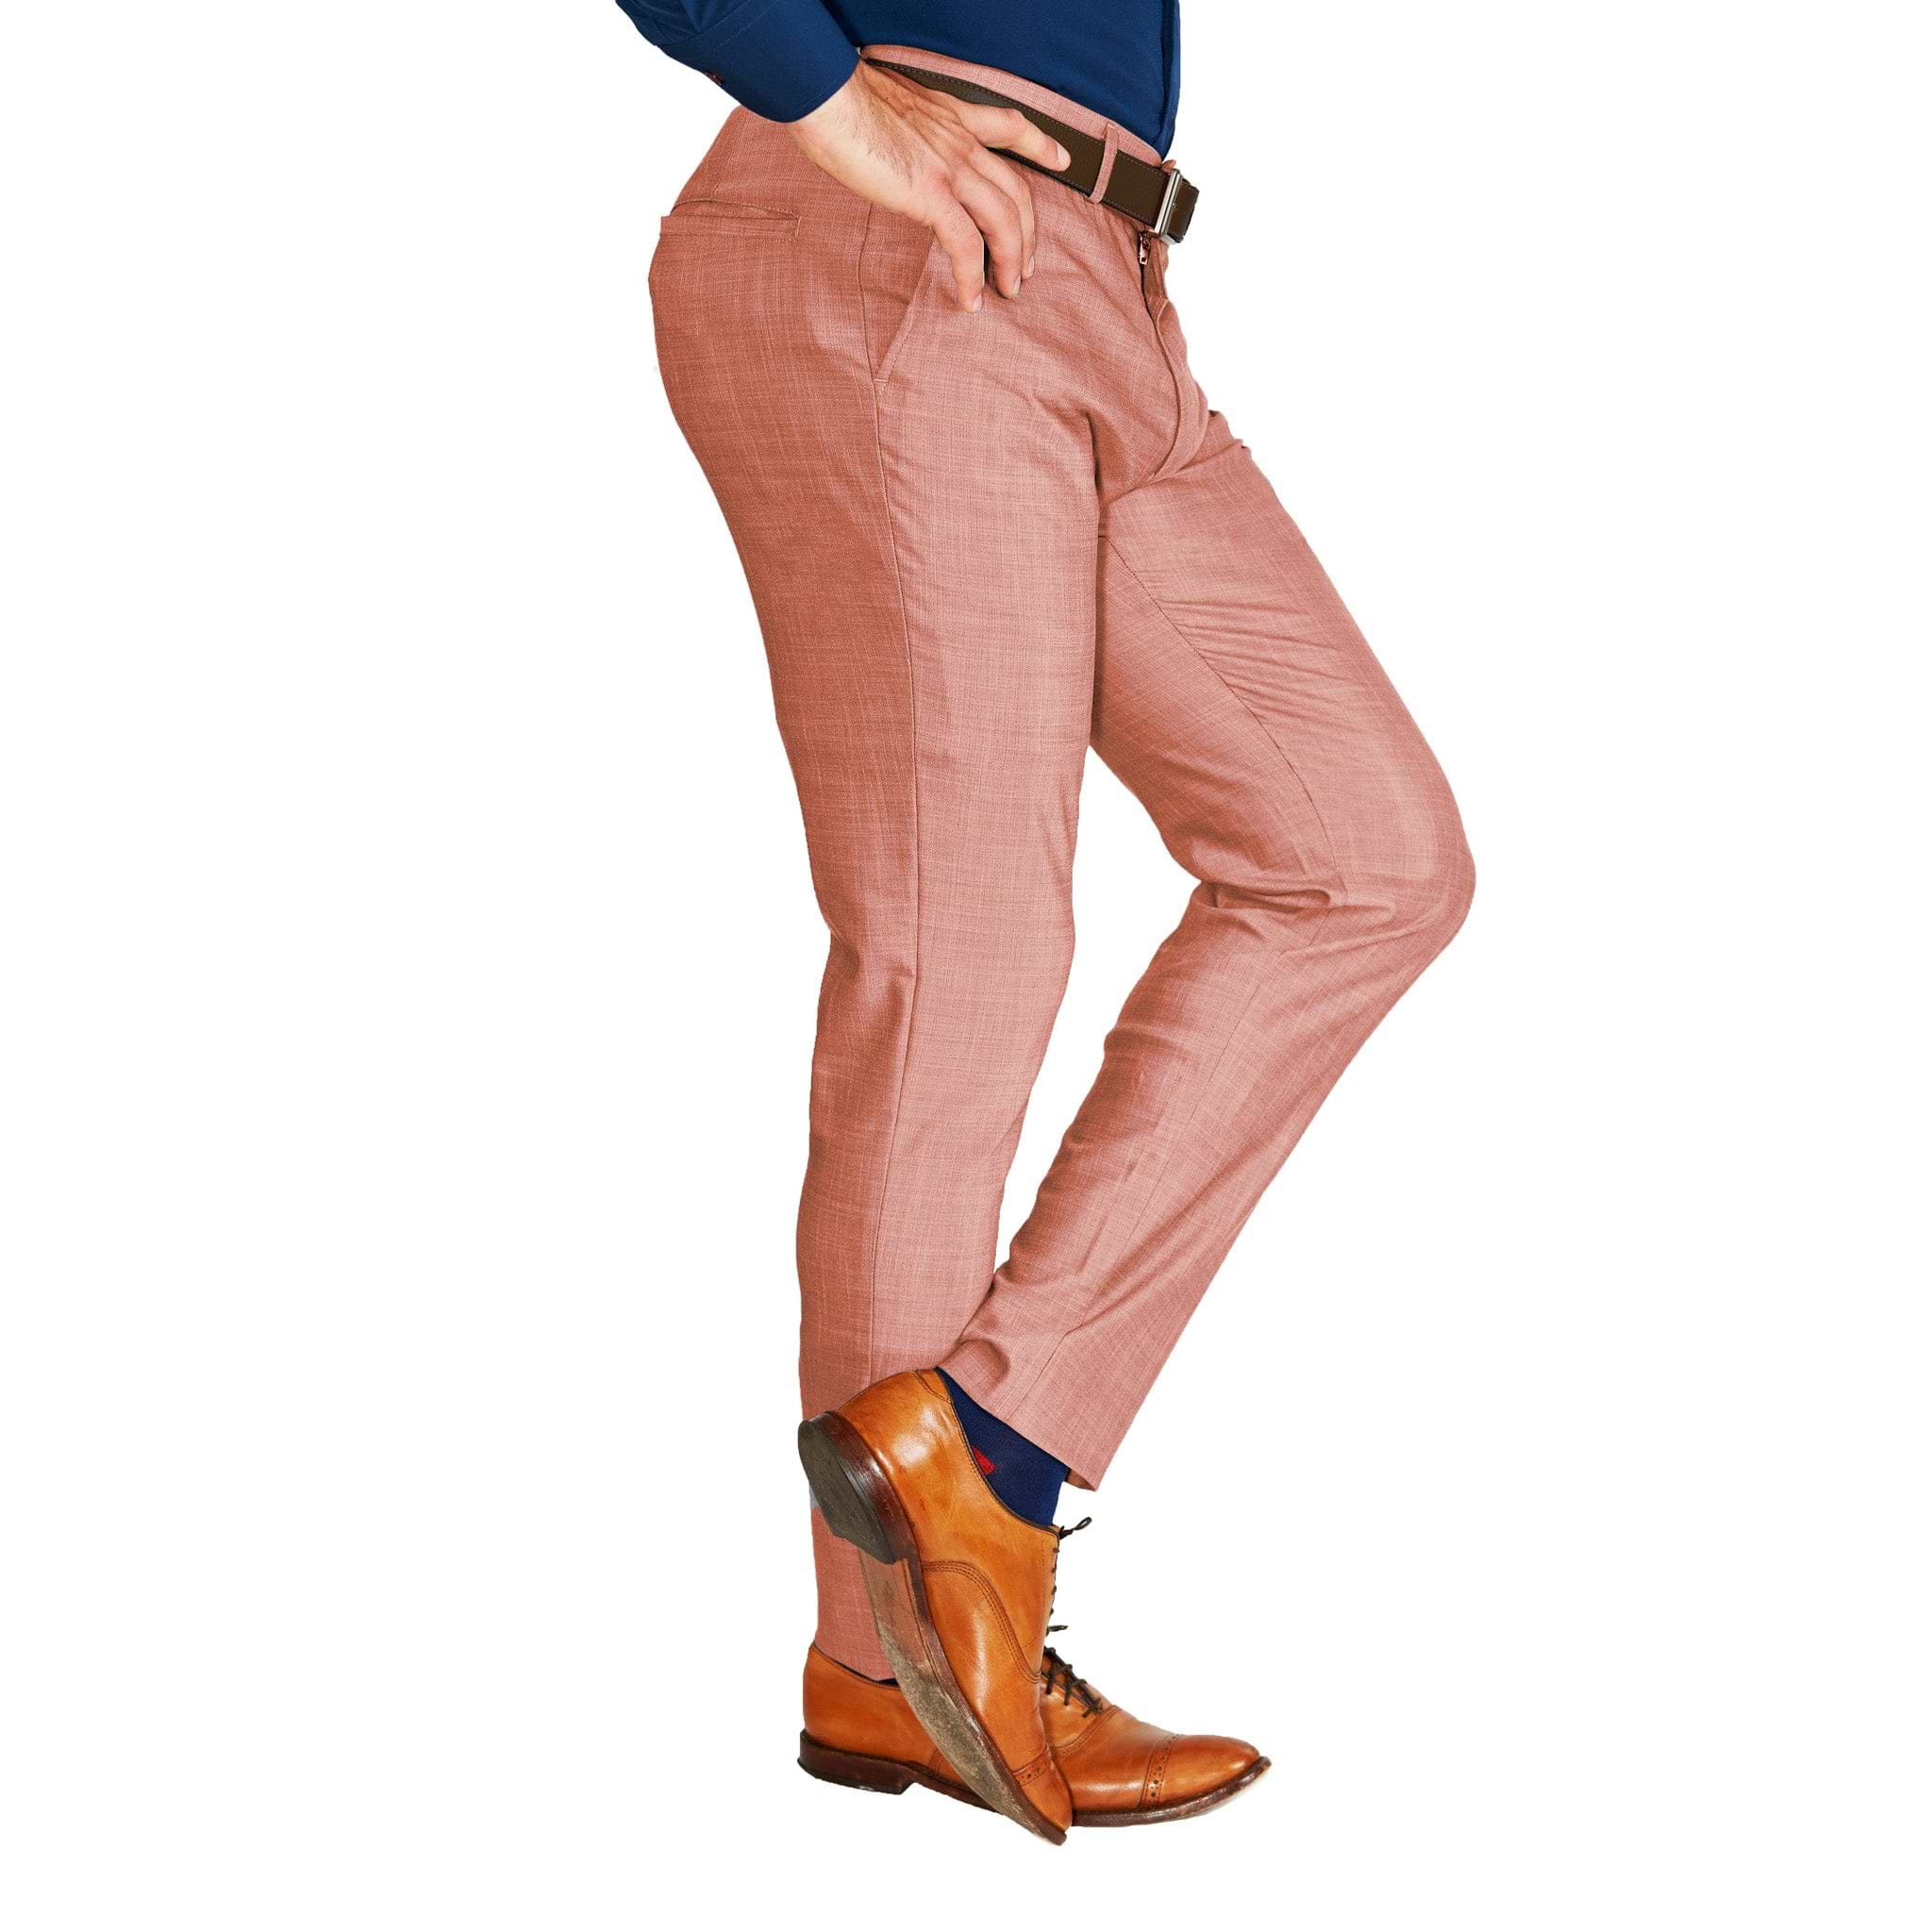 Athletic Fit Stretch Pants - Heathered Salmon